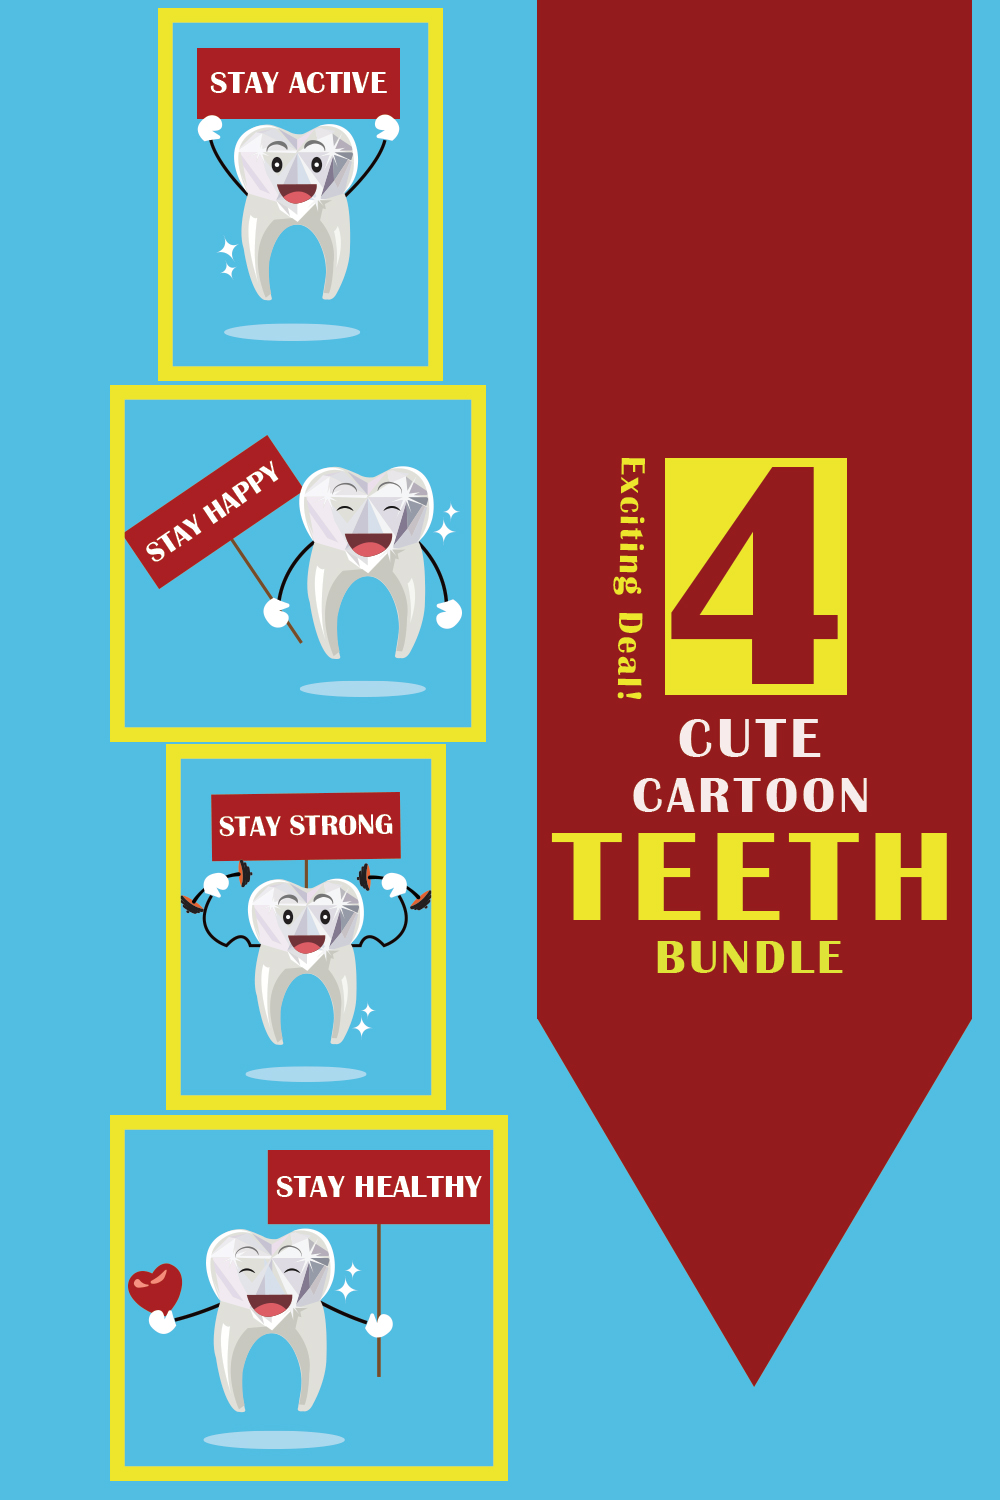 4 Cute Cartoon teeth High Quality Vector Illustration for DENTAL purposes pinterest preview image.